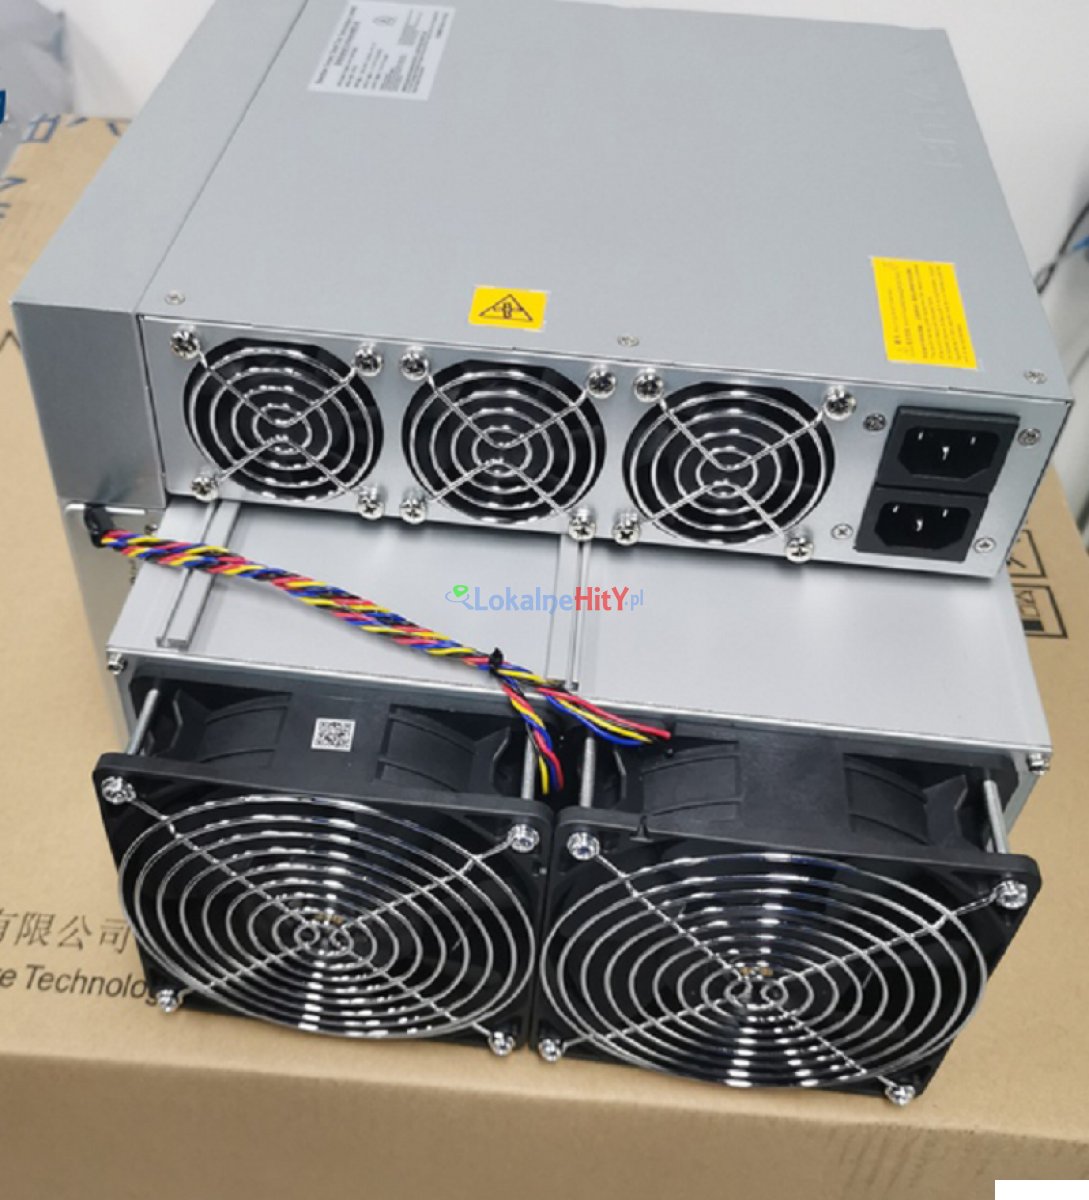 Goldshell KD5 18TH/s Kadena, Goldshell KD6 29.2Th/s Kadena, Goldshell KD2 6.4TH/s Kadena, Goldshell KD-BOX Pro 2.6TH,  Bitmain AntMiner S19 Pro 110Th